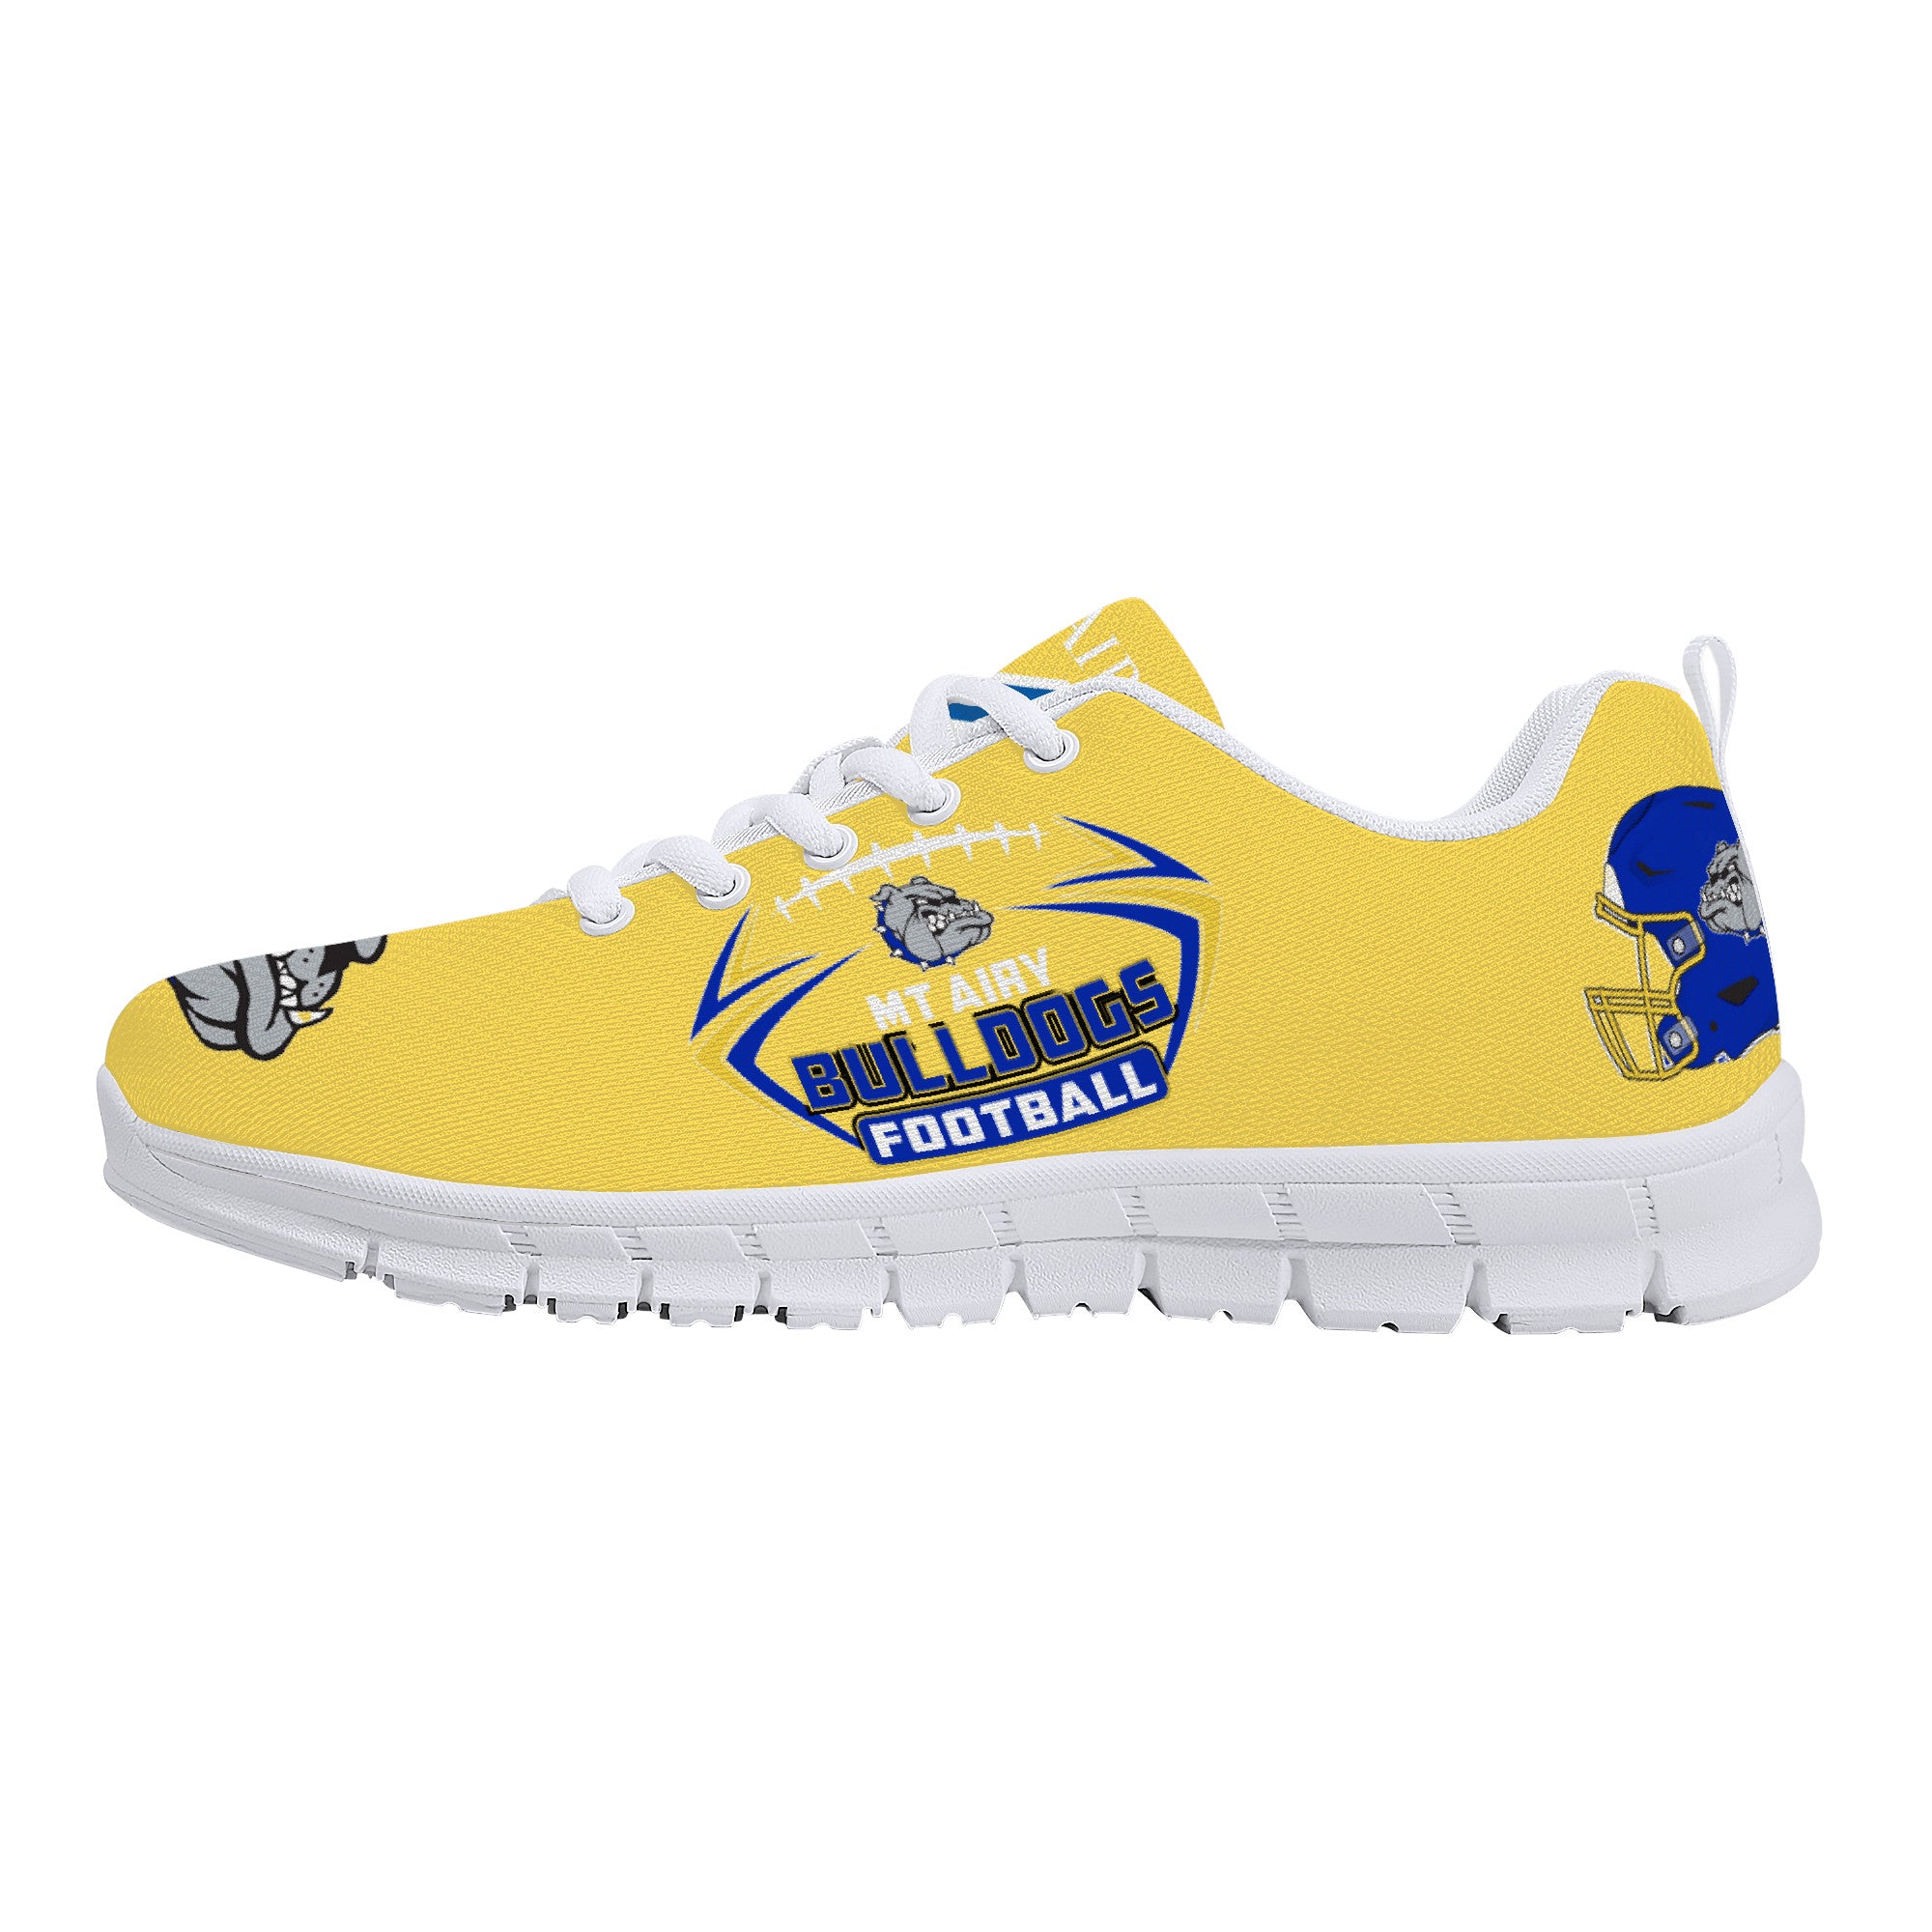 Bulldogs Football shoes by Philip S. | Low Tops Customized | Shoe Zero